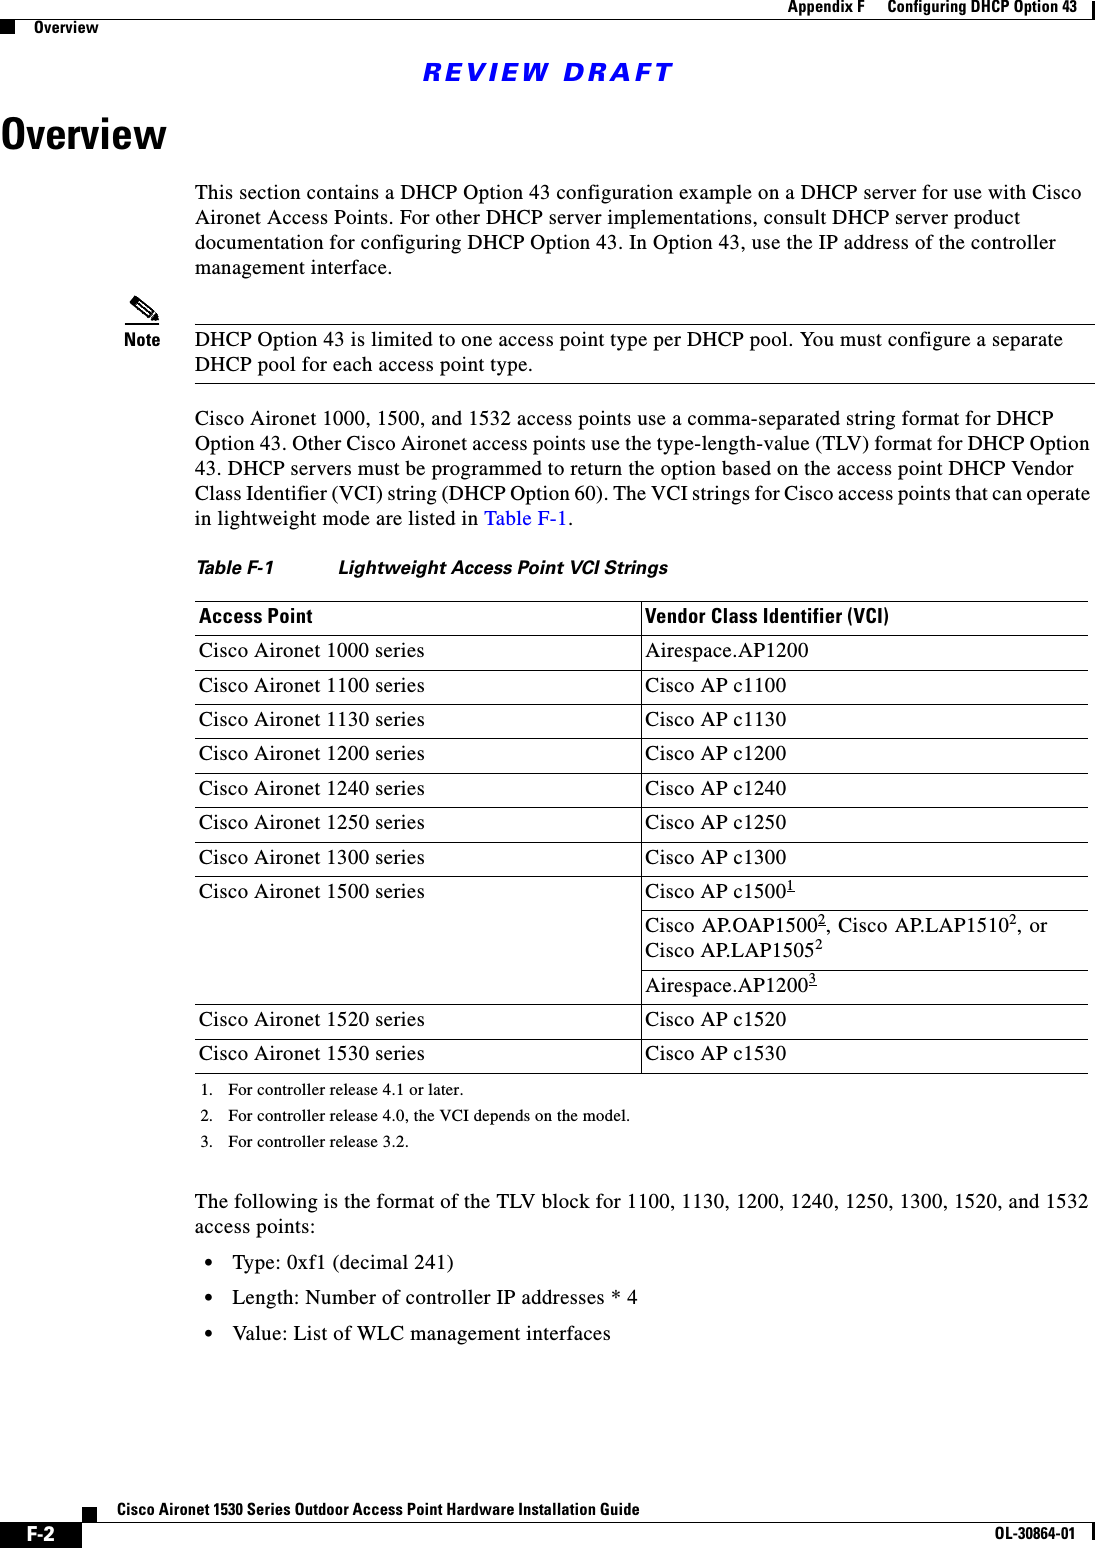 REVIEW DRAFTF-2Cisco Aironet 1530 Series Outdoor Access Point Hardware Installation GuideOL-30864-01Appendix F      Configuring DHCP Option 43OverviewOverviewThis section contains a DHCP Option 43 configuration example on a DHCP server for use with Cisco Aironet Access Points. For other DHCP server implementations, consult DHCP server product documentation for configuring DHCP Option 43. In Option 43, use the IP address of the controller management interface.Note DHCP Option 43 is limited to one access point type per DHCP pool. You must configure a separate DHCP pool for each access point type.Cisco Aironet 1000, 1500, and 1532 access points use a comma-separated string format for DHCP Option 43. Other Cisco Aironet access points use the type-length-value (TLV) format for DHCP Option 43. DHCP servers must be programmed to return the option based on the access point DHCP Vendor Class Identifier (VCI) string (DHCP Option 60). The VCI strings for Cisco access points that can operate in lightweight mode are listed in Table F-1. The following is the format of the TLV block for 1100, 1130, 1200, 1240, 1250, 1300, 1520, and 1532 access points: •Type: 0xf1 (decimal 241) •Length: Number of controller IP addresses * 4 •Value: List of WLC management interfaces Table F-1 Lightweight Access Point VCI StringsAccess Point Vendor Class Identifier (VCI)Cisco Aironet 1000 series Airespace.AP1200Cisco Aironet 1100 series Cisco AP c1100Cisco Aironet 1130 series Cisco AP c1130Cisco Aironet 1200 series Cisco AP c1200Cisco Aironet 1240 series Cisco AP c1240Cisco Aironet 1250 series Cisco AP c1250Cisco Aironet 1300 series Cisco AP c1300Cisco Aironet 1500 series Cisco AP c150011. For controller release 4.1 or later.Cisco AP.OAP15002, Cisco AP.LAP15102, orCisco AP.LAP15052 2. For controller release 4.0, the VCI depends on the model.Airespace.AP120033. For controller release 3.2.Cisco Aironet 1520 series Cisco AP c1520Cisco Aironet 1530 series Cisco AP c1530